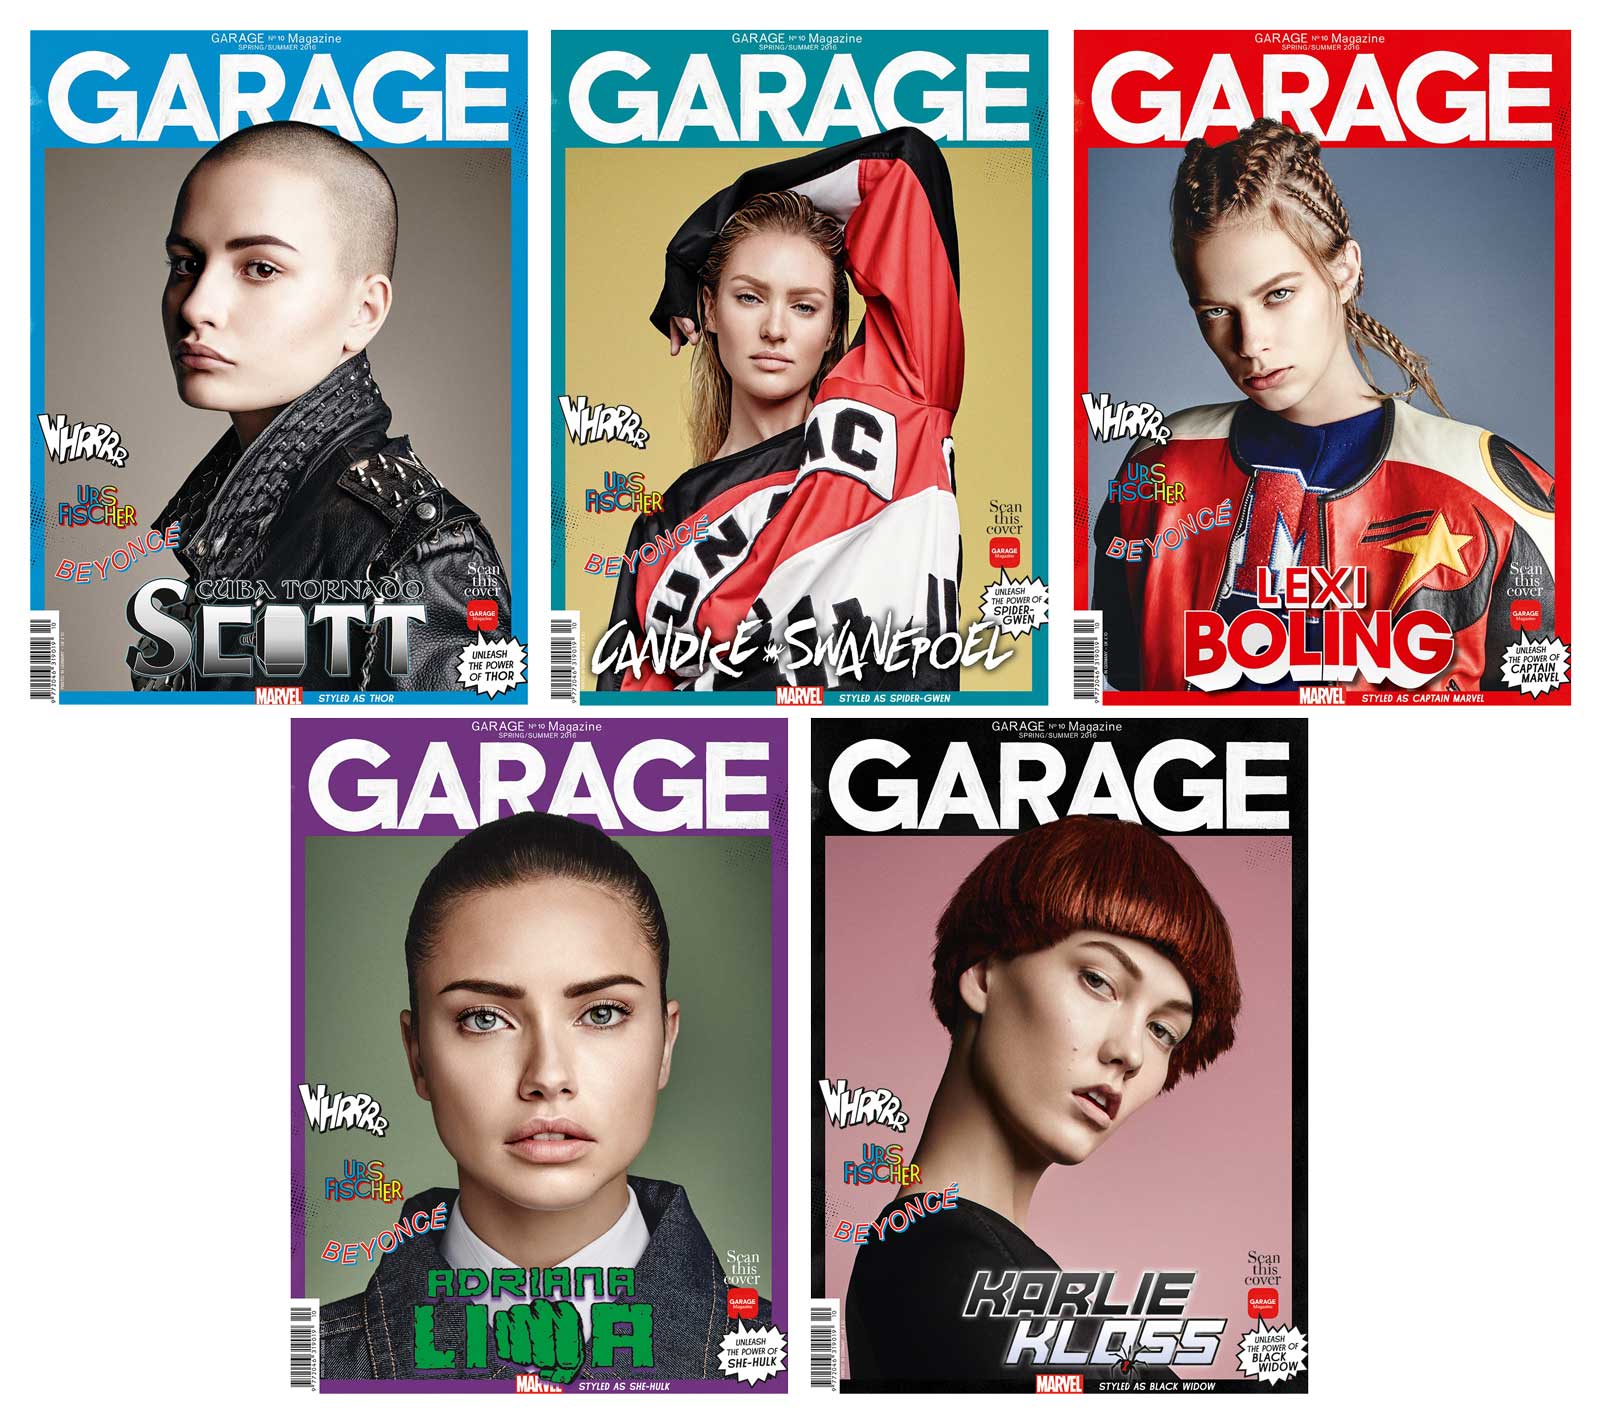 A montage of the Garage 10 covers featuring models Cuba Tornado Scott as Thor, Candice Swanepole as Spider-Gwen, Lexi Bowling as Captain Marvel, Adriana Lima as She-Hulk and Karlie Kloss as Black Widow.